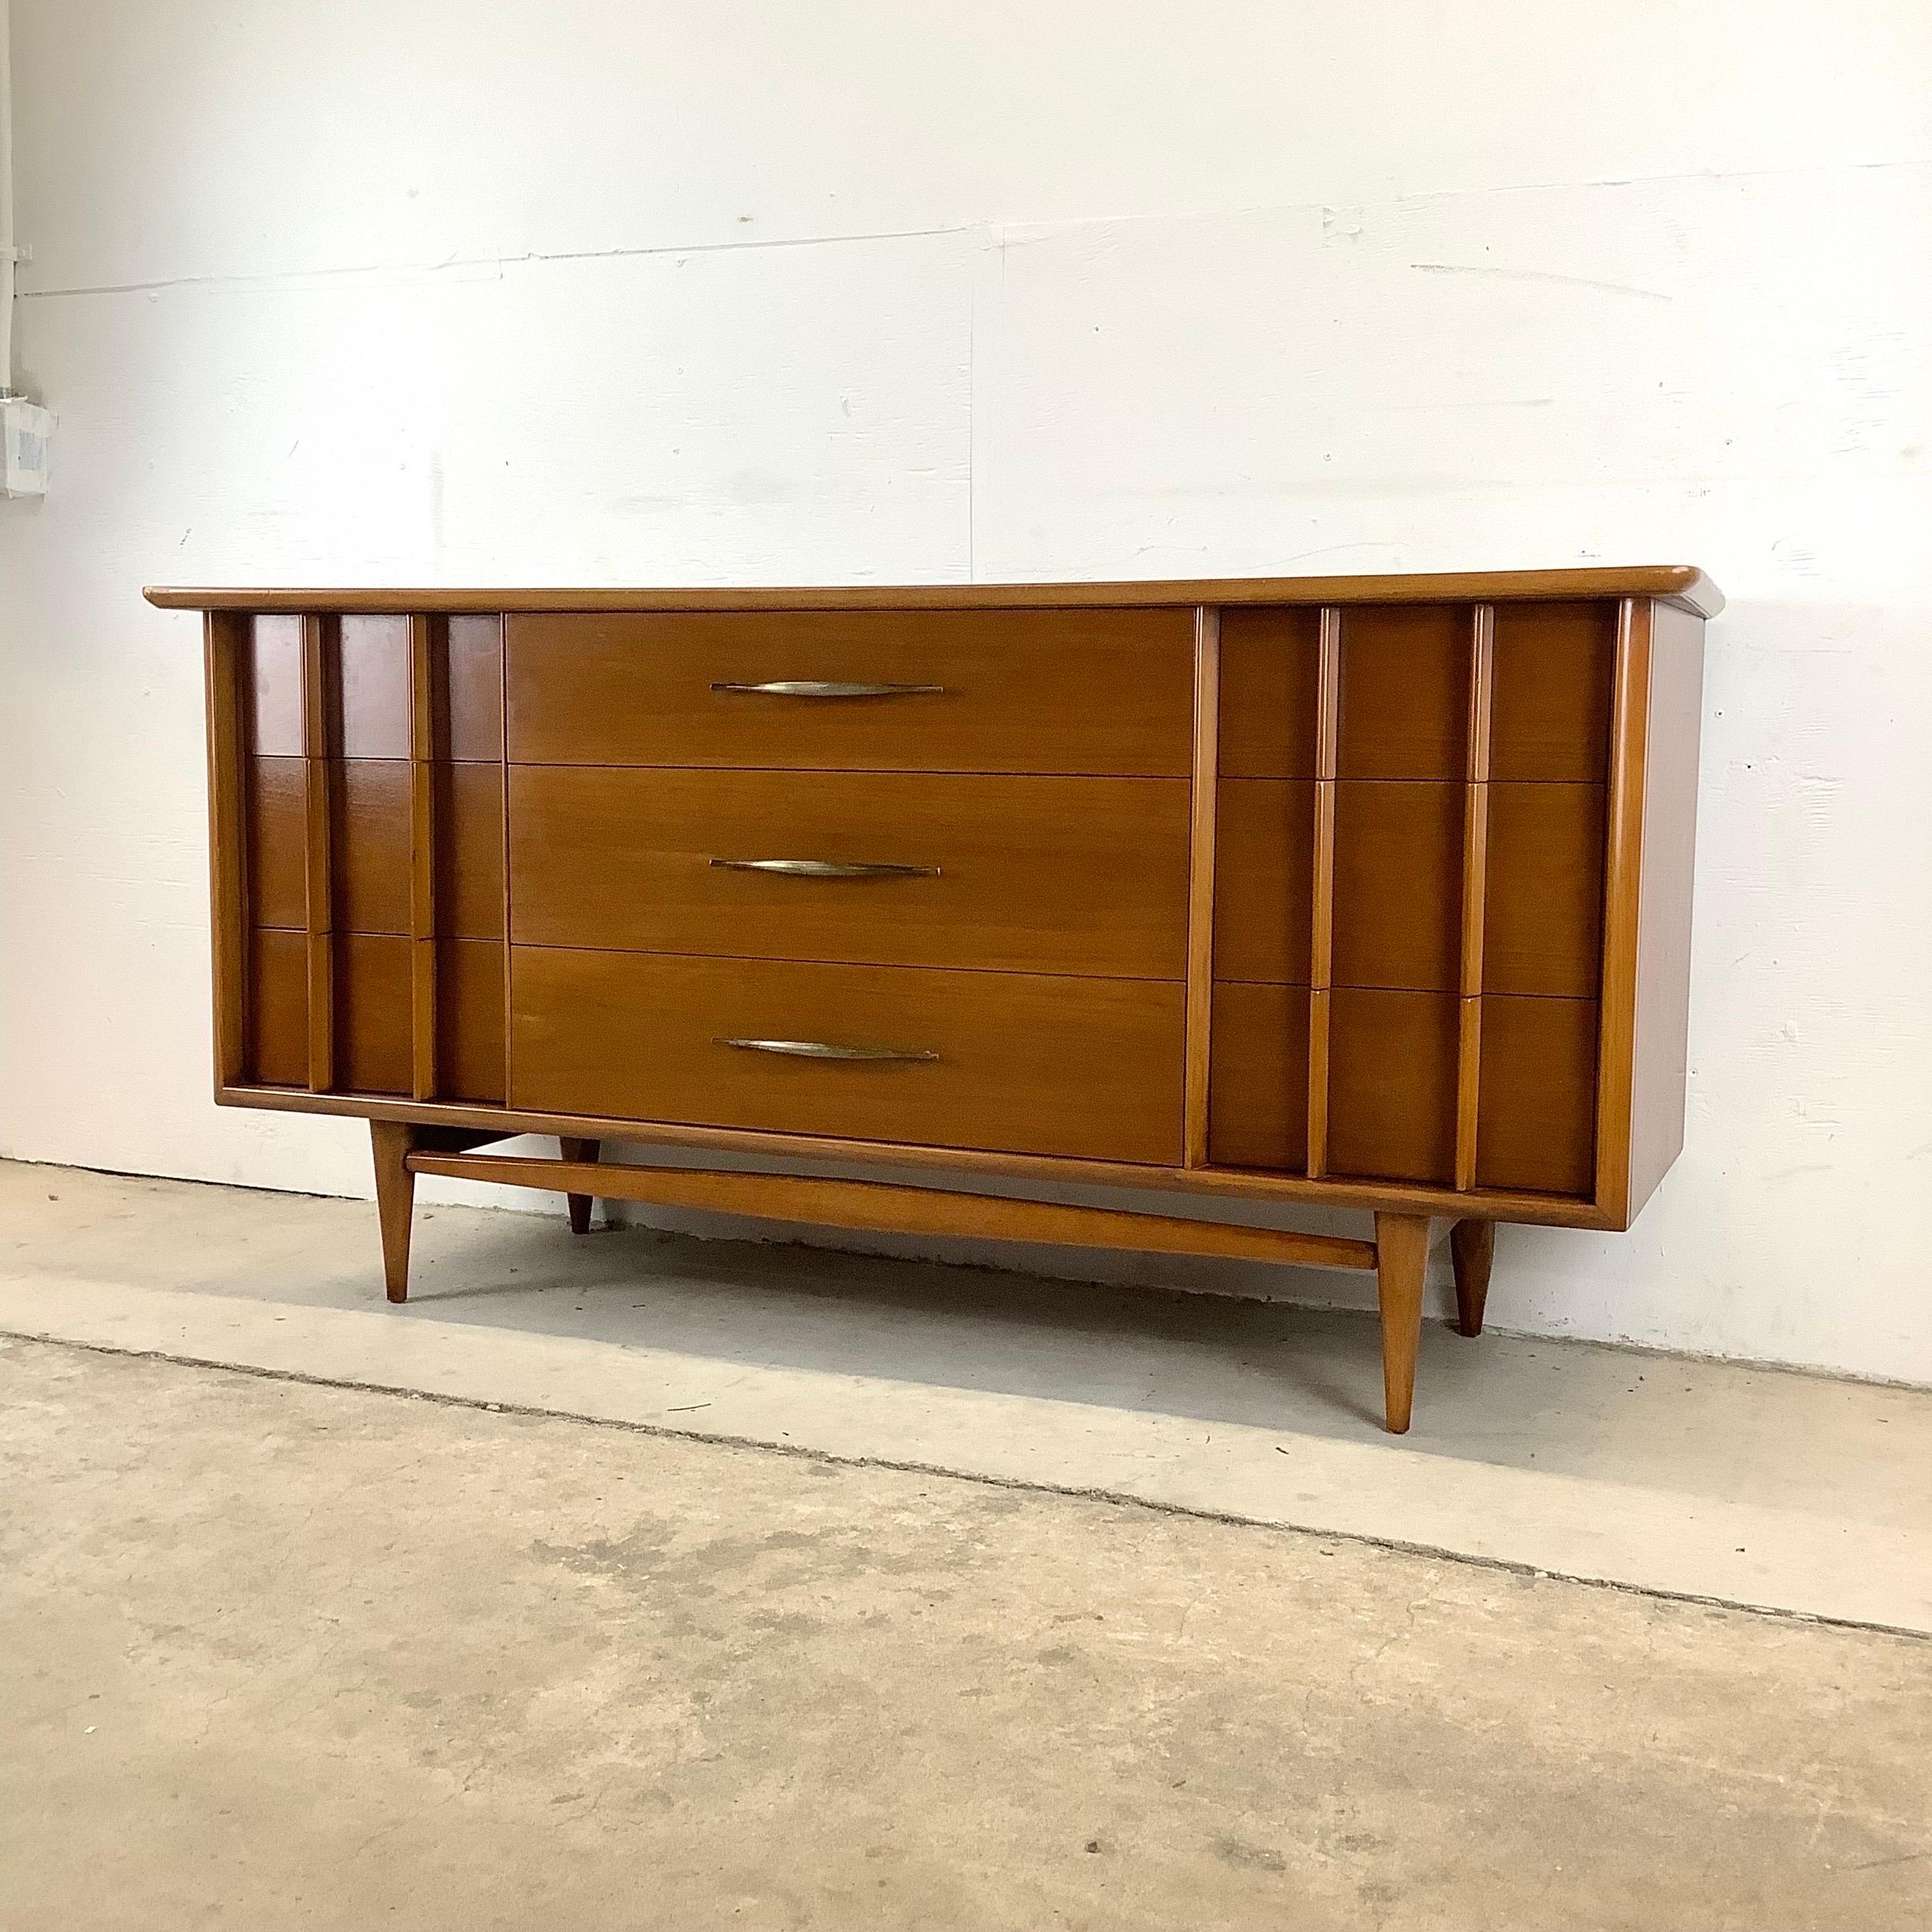 This stylish vintage walnut bedroom dresser from mid-century manufacturer Kent Coffey is from their highly sought after Foreteller line. Unique sculptural drawer pulls, tapered hardwood legs, wide brass center pulls, and clean modern lines make this